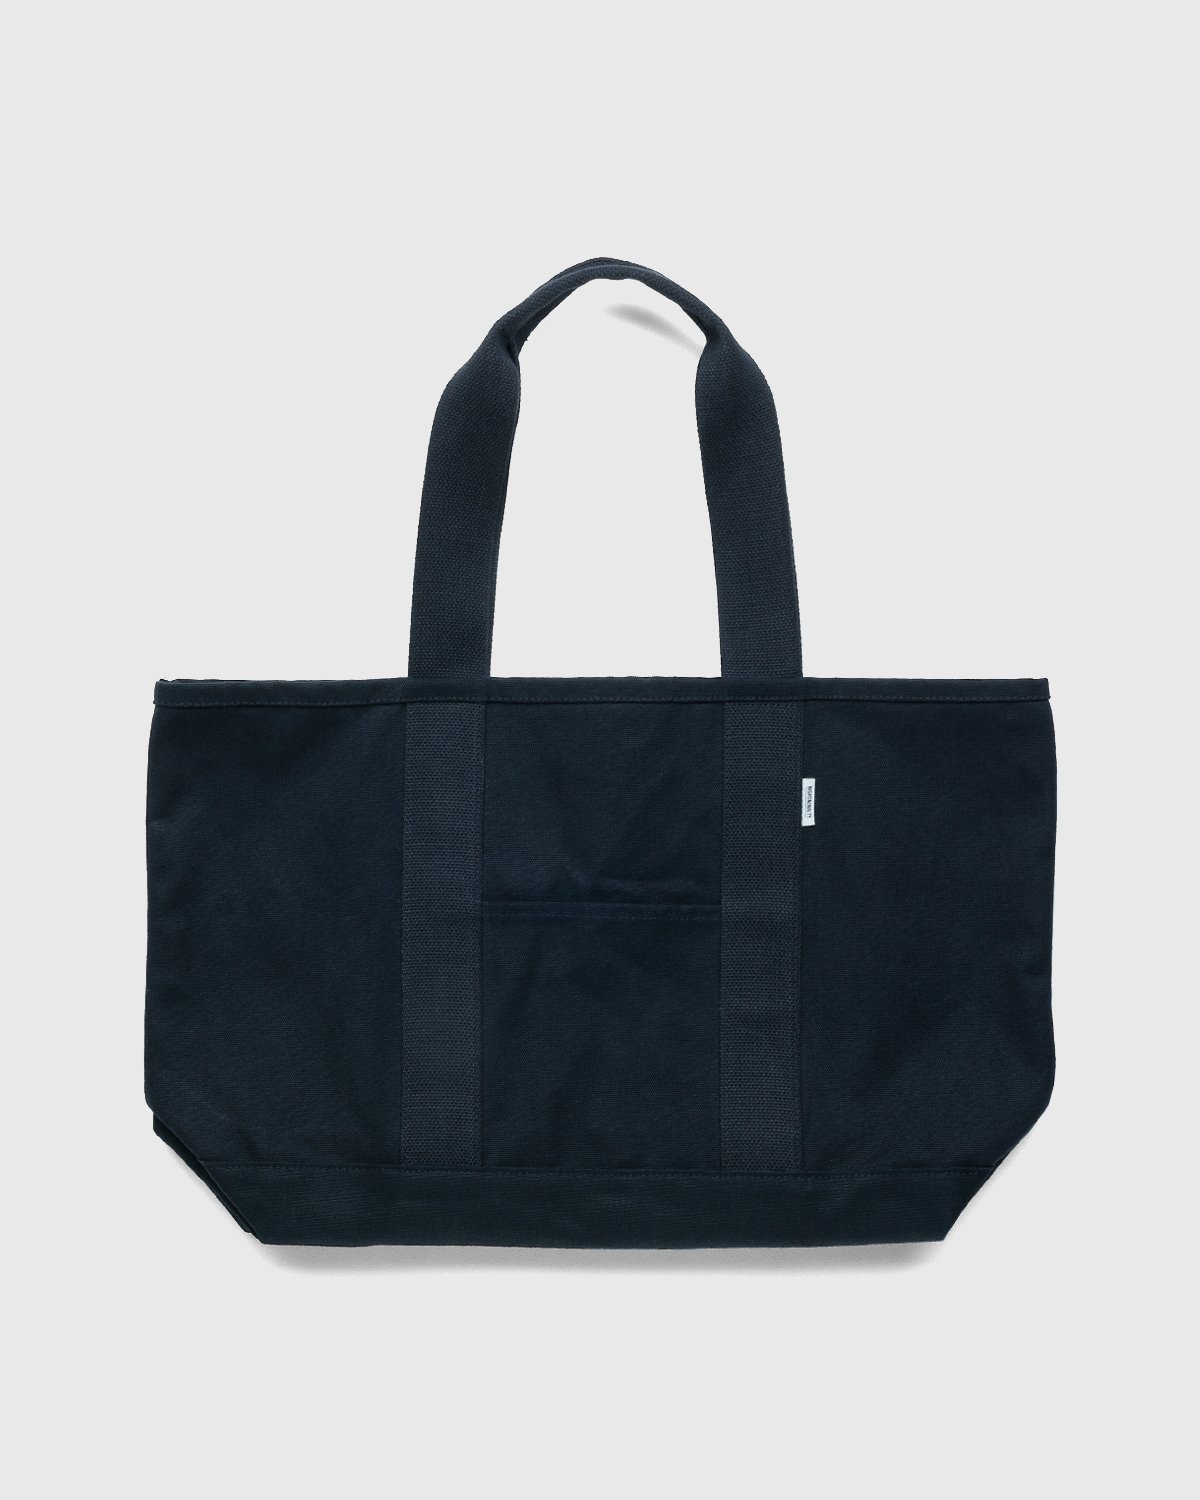 Highsnobiety - Heavy Canvas Large Shopper Tote Black - Accessories - Black - Image 2